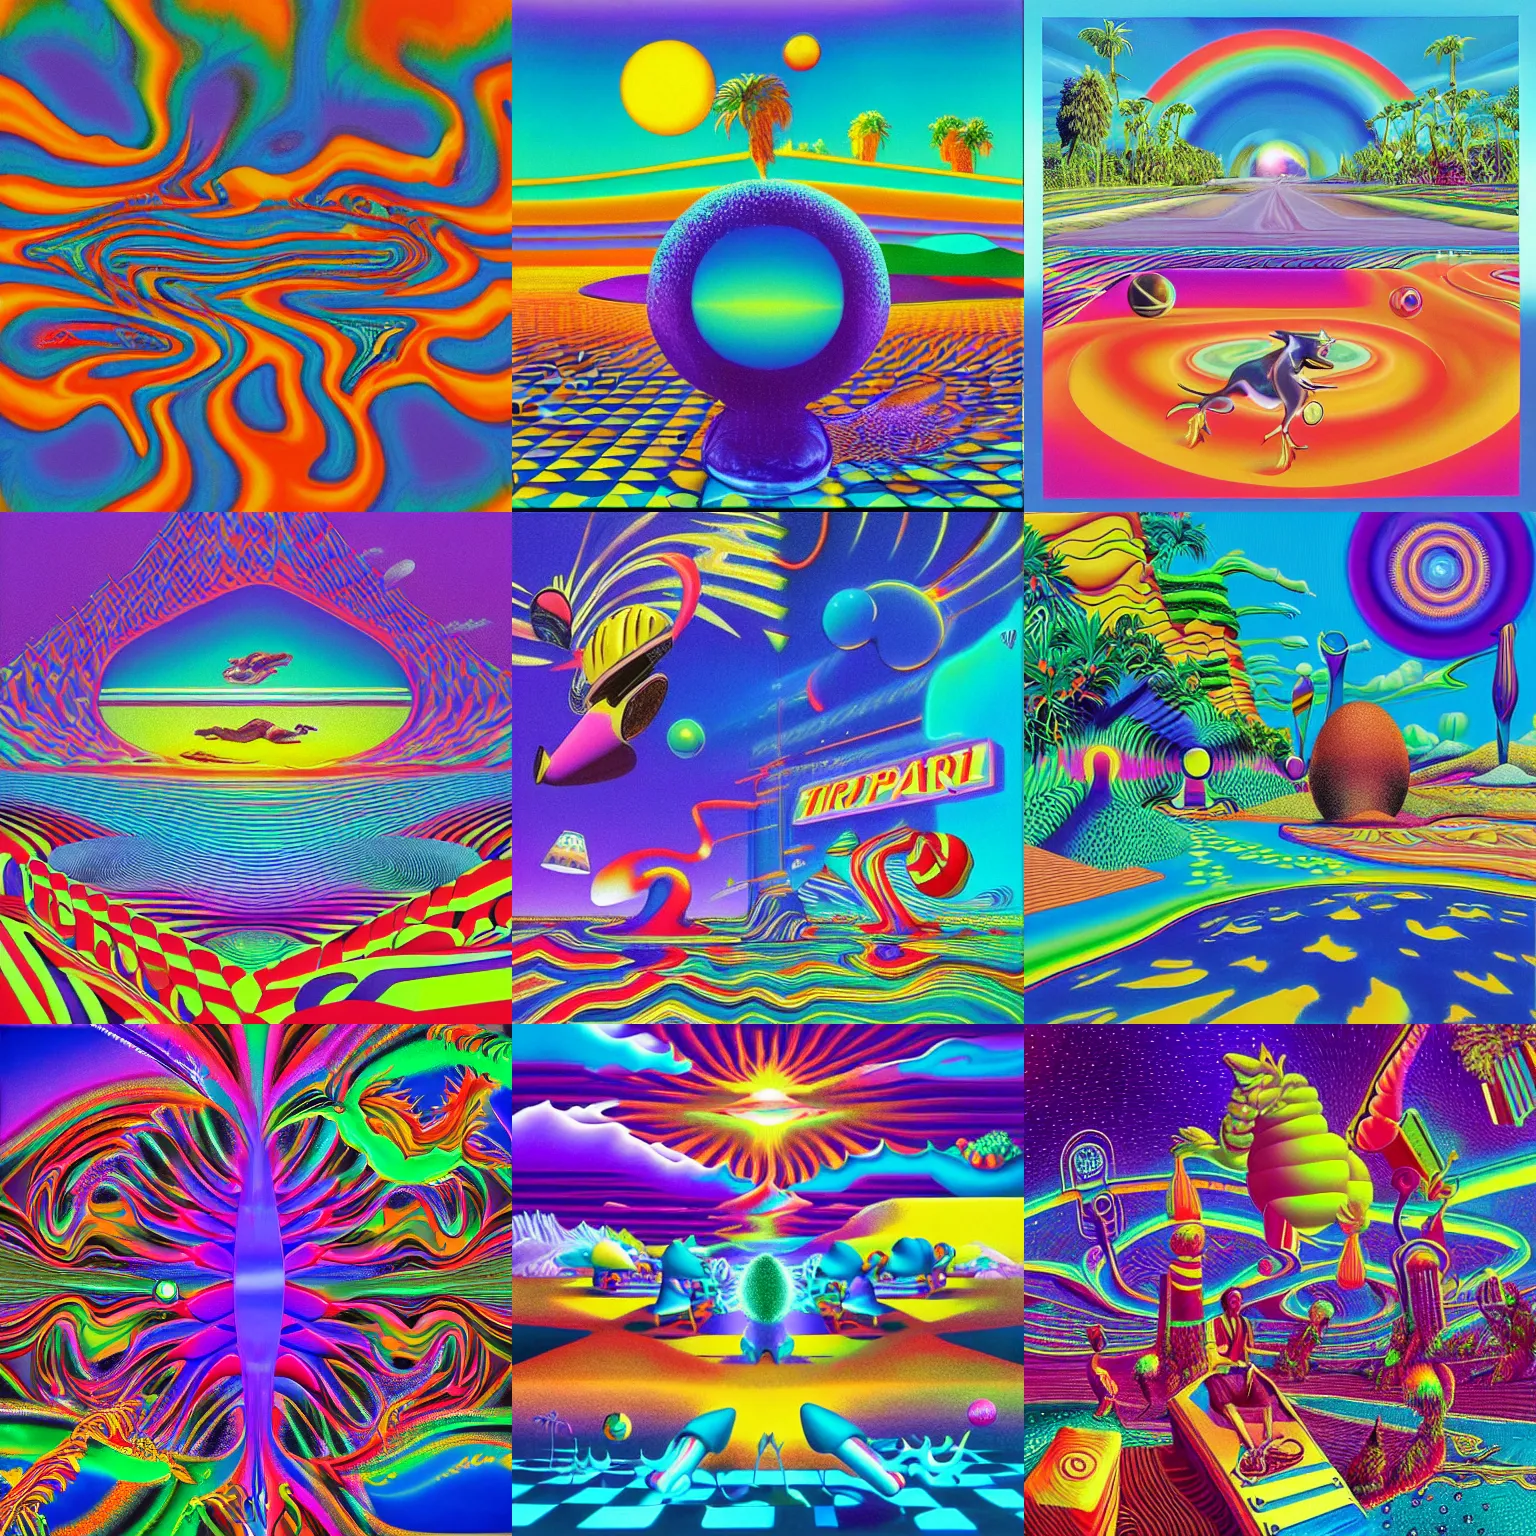 Prompt: surreal, detailed professional, high quality airbrush art tame impala album cover of a liquid dissolving airbrush art lsd dmt sonic the hedgehog dashing through cyberspace, purple checkerboard background, 1 9 8 0 s 1 9 8 2 sega genesis video game album cover